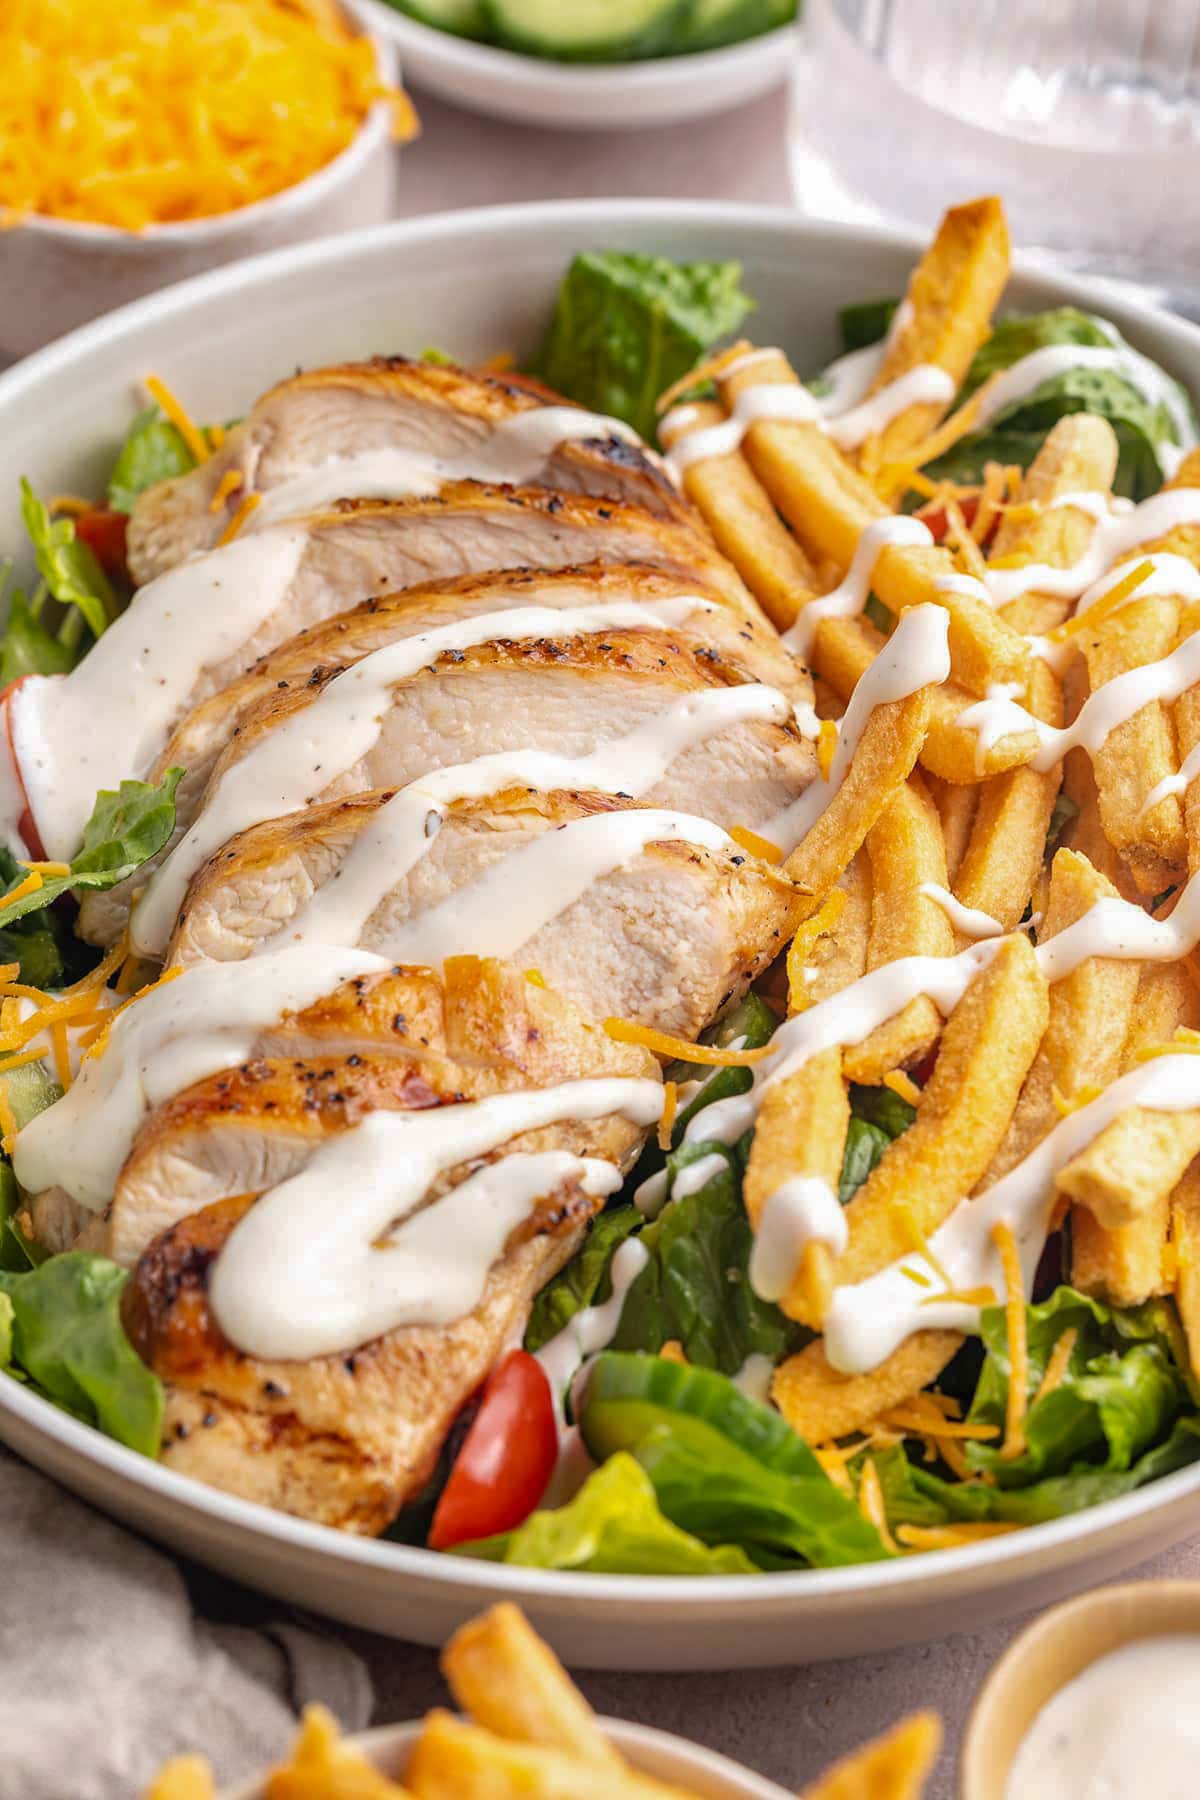 A Pittsburgh chicken salad with crisp french fries, drizzled with salad dressing, in a large bowl.